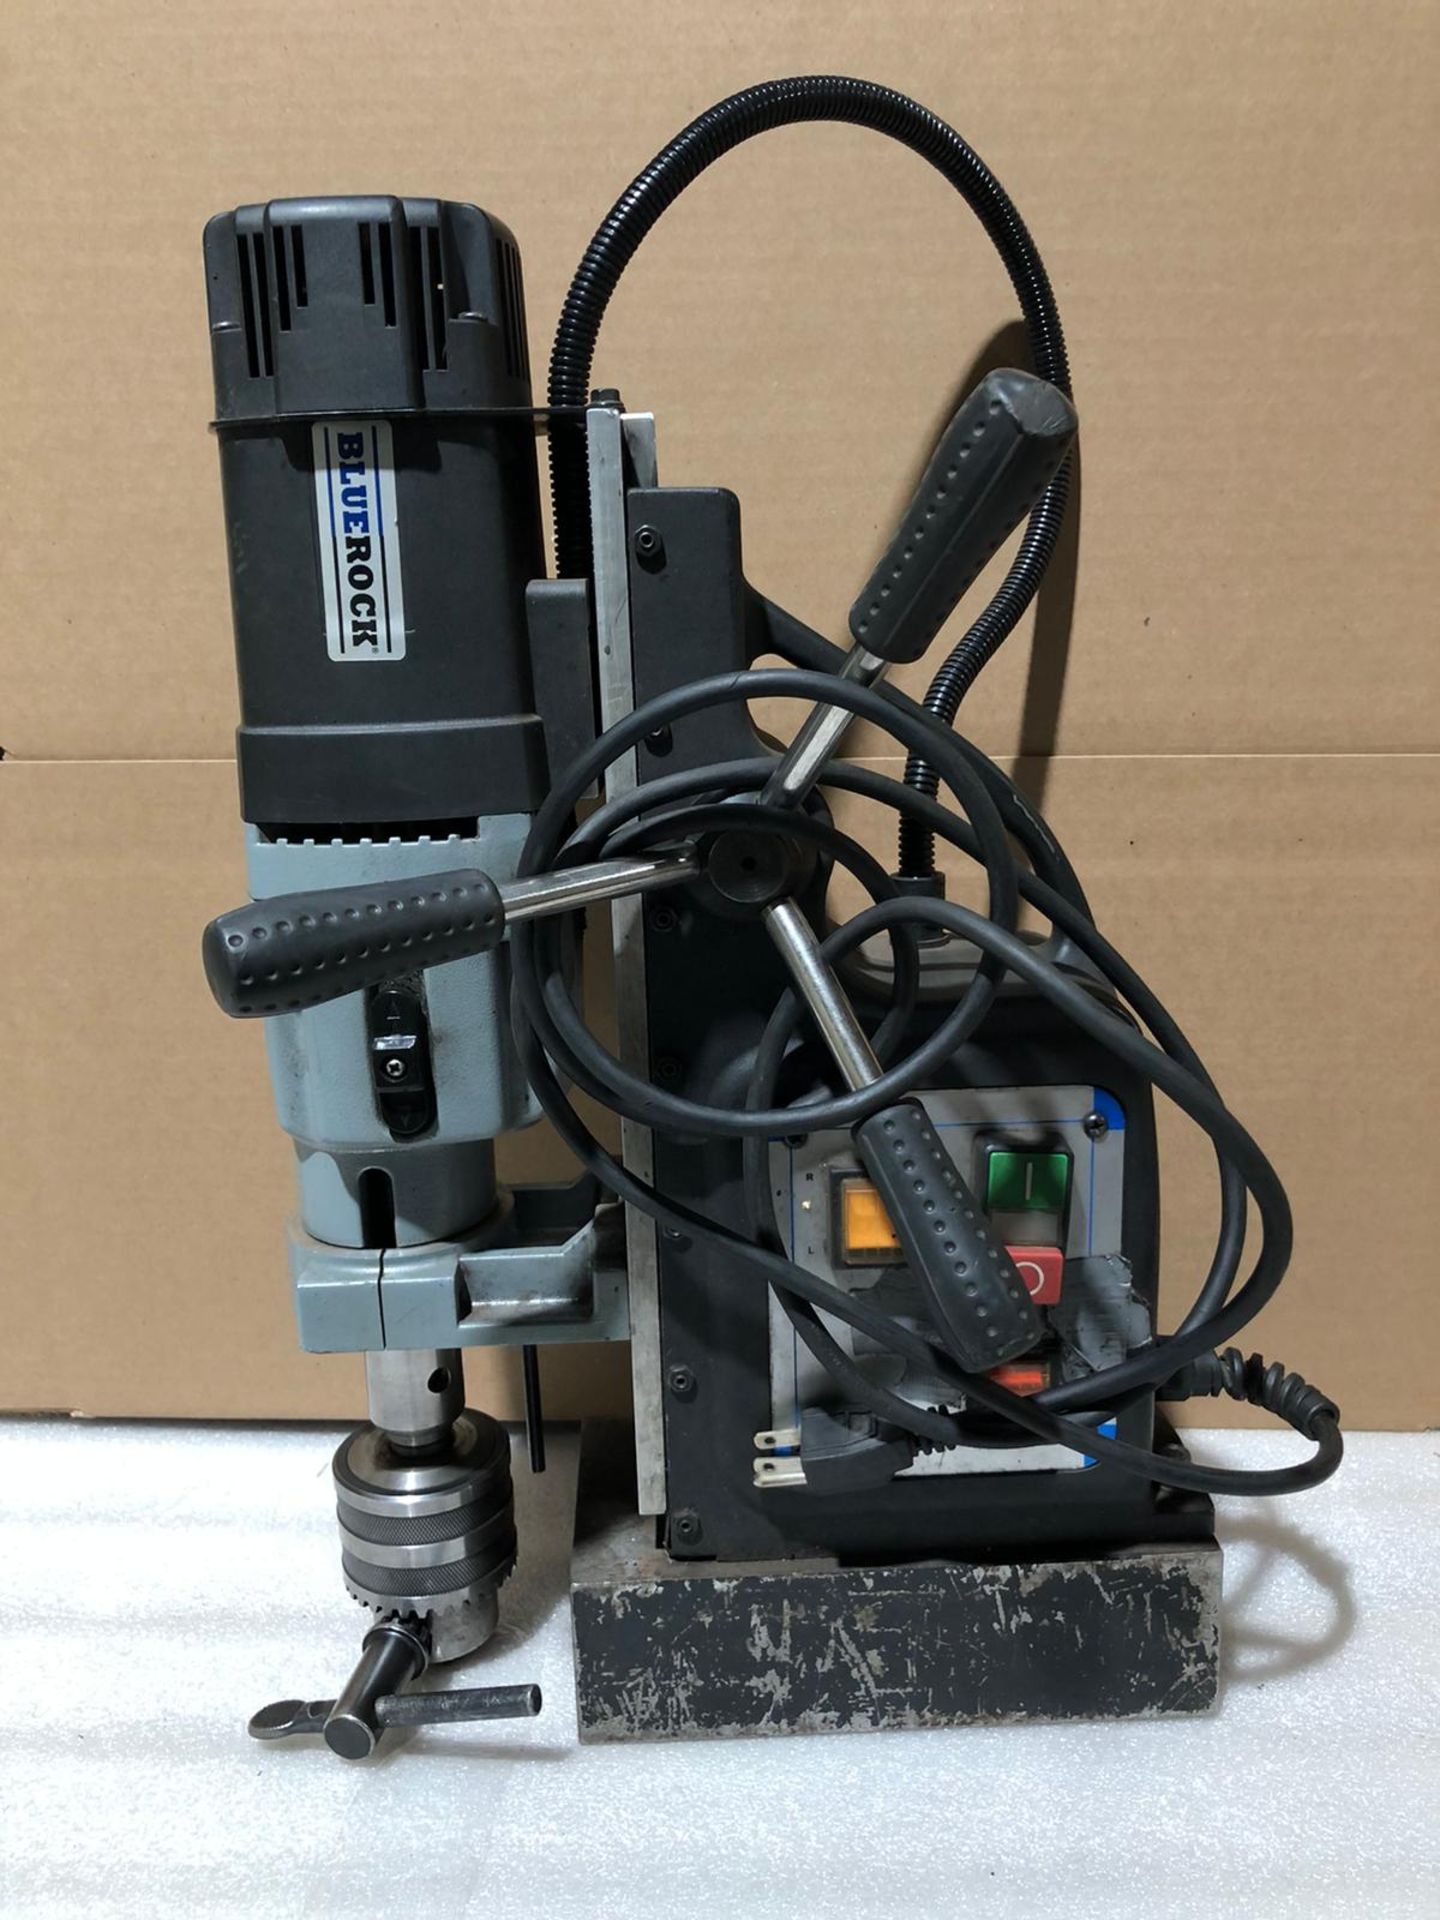 BlueRock Magnetic Mag Drill Unit with Drill Chuck - 120V - Image 4 of 4